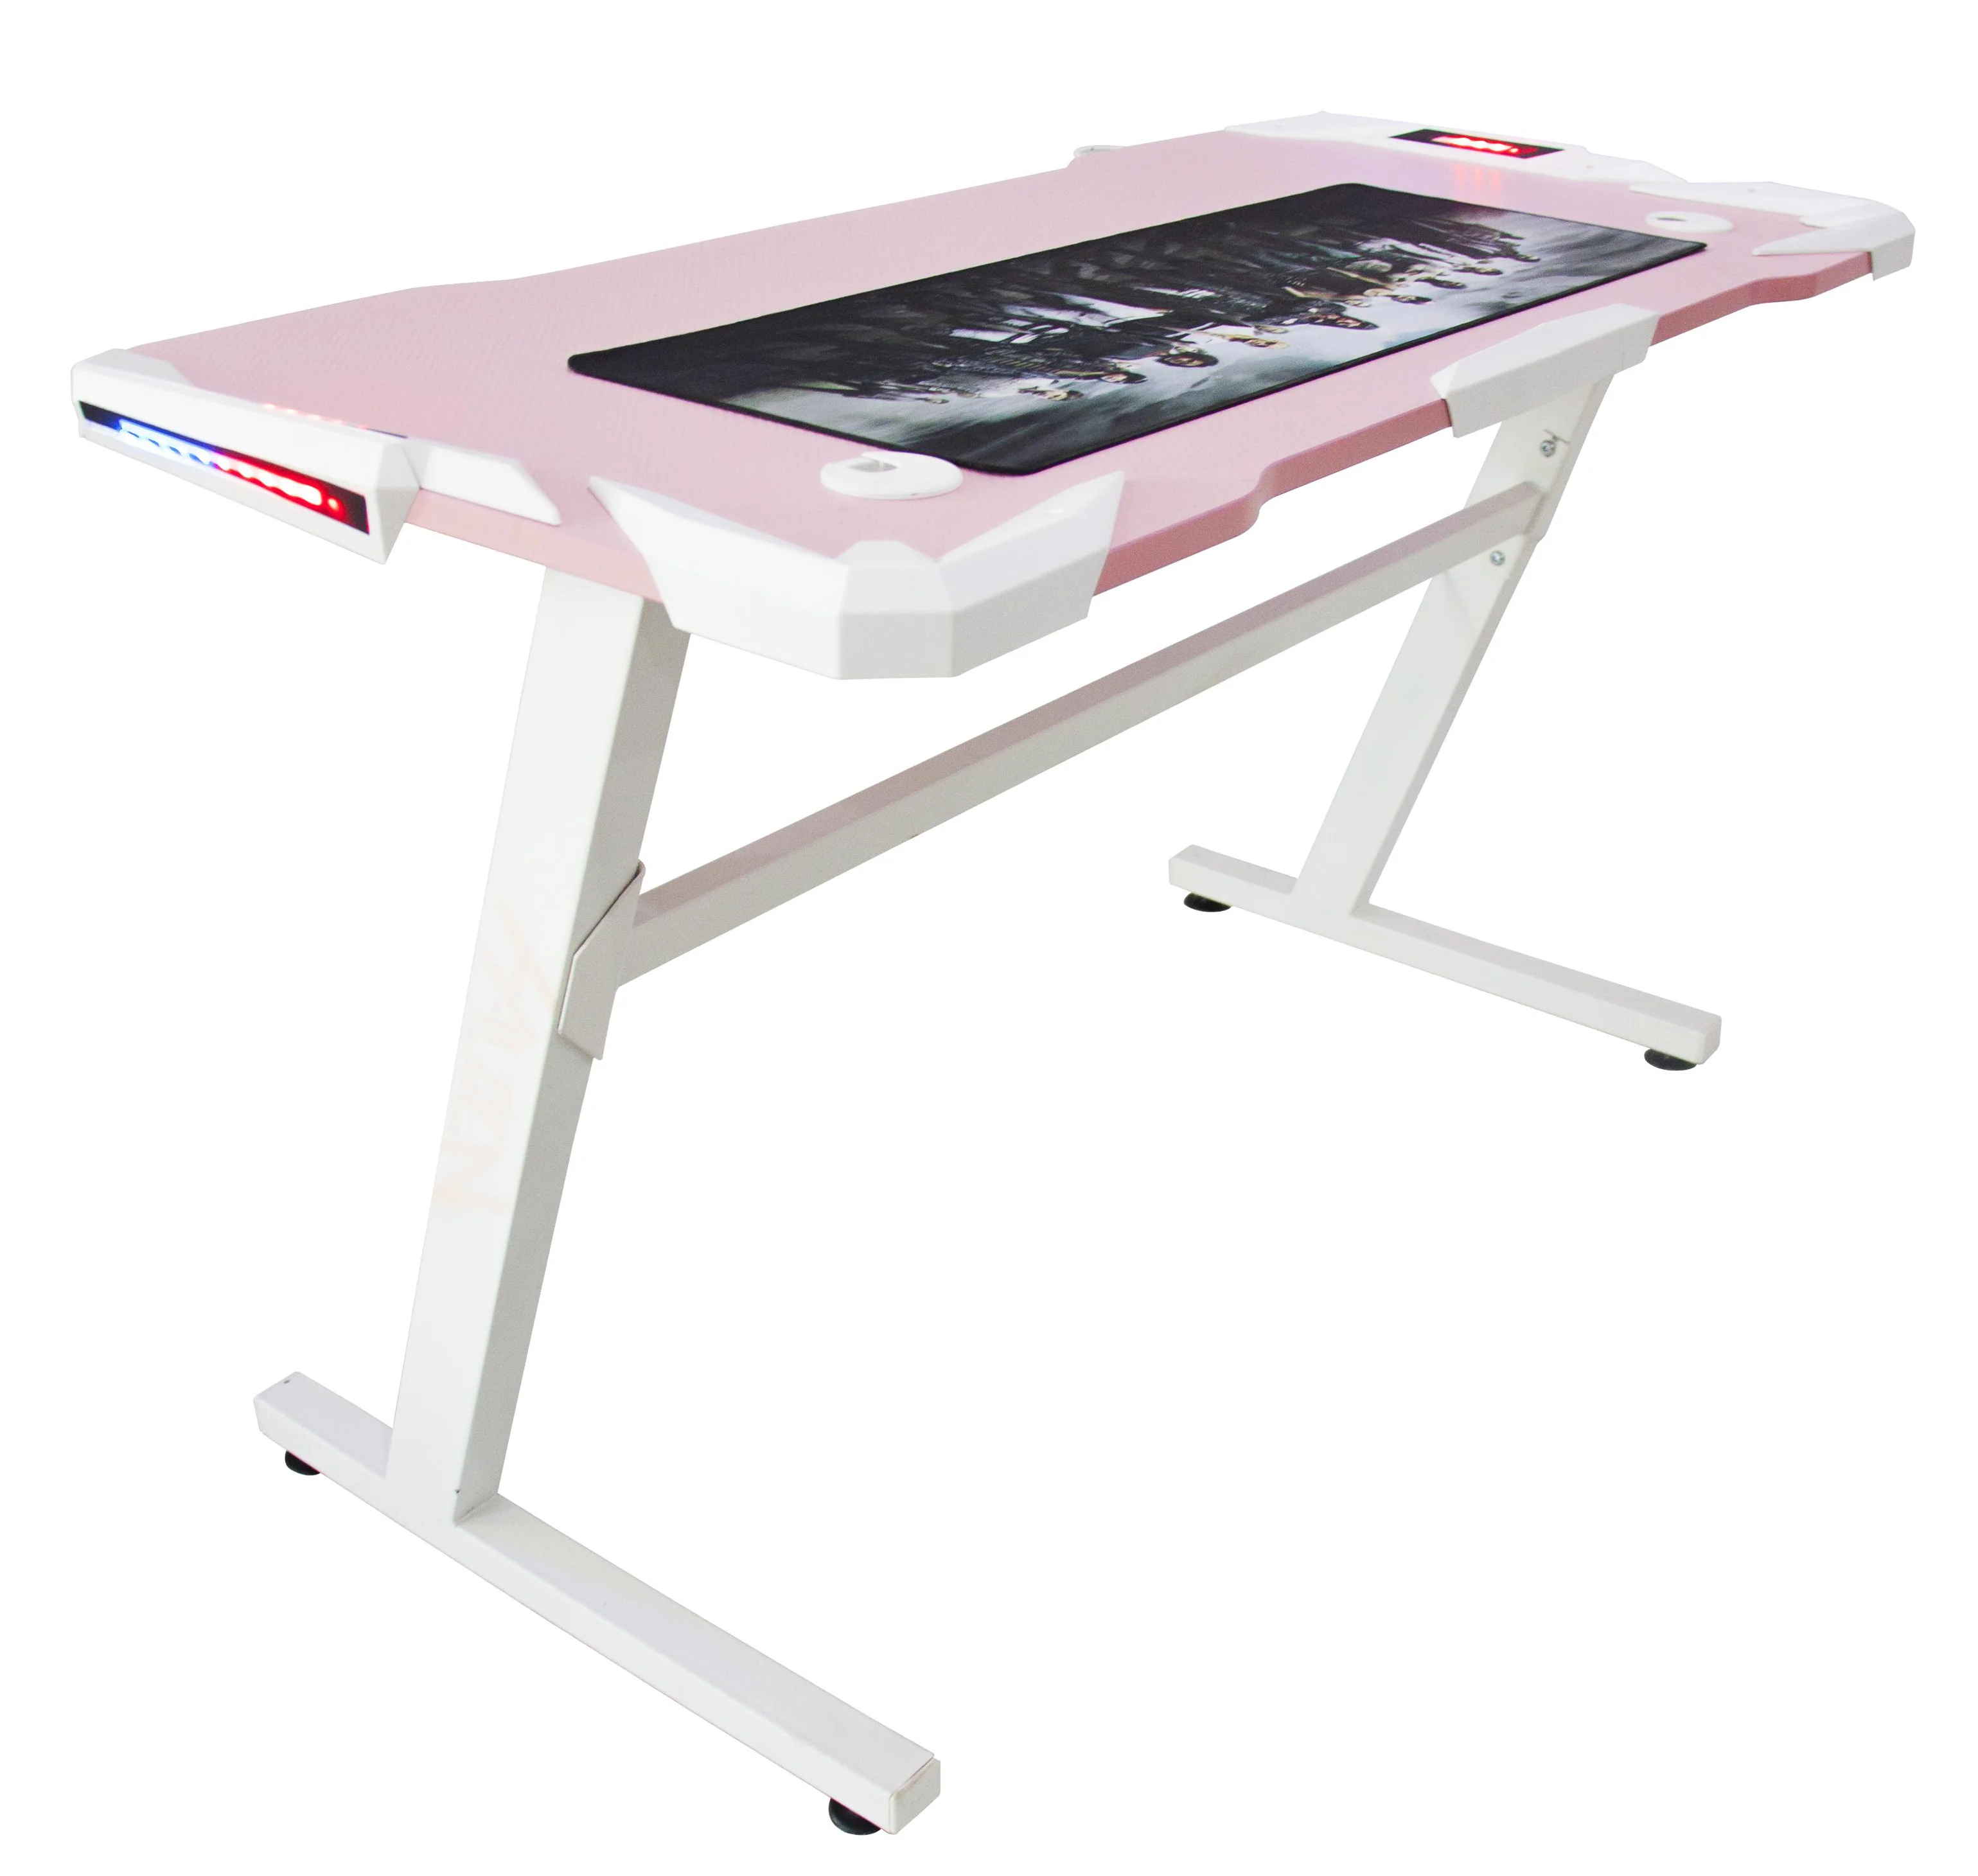 High quality pink laptop table gaming table and cheap laptop table wholesale